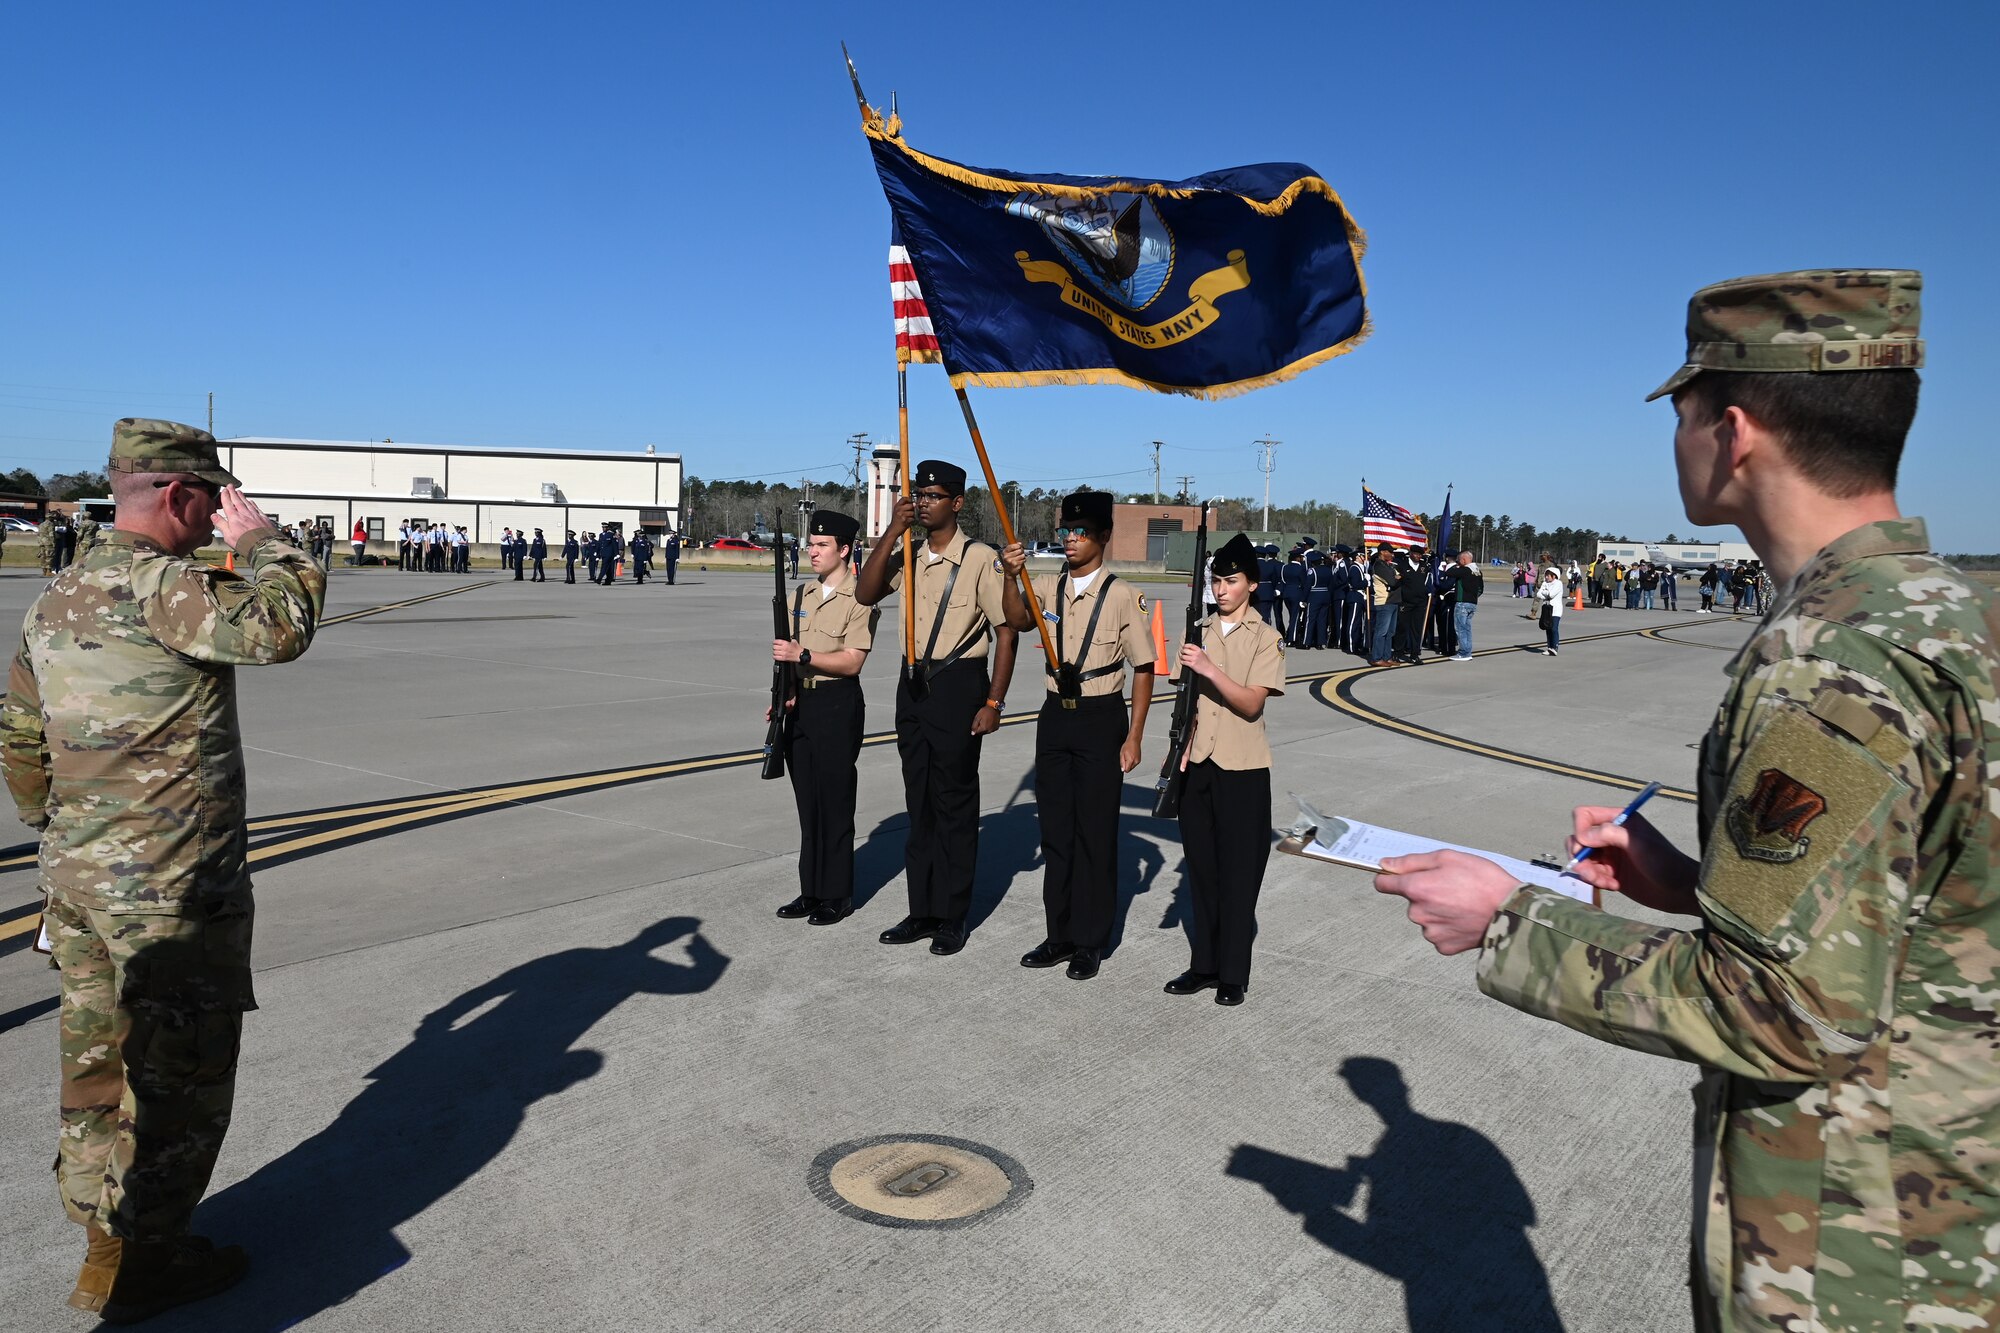 The Dreher High School ‘Color Guard’ team from Columbia, South Carolina competes during the annual Top Gun Drill Meet at McEntire Joint National Guard Base, South Carolina, March 26, 2022. High School Junior Reserve Officers Training Corps cadets from twenty high schools from across the state competed in twelve drill and ceremony events sponsored by the South Carolina Air National Guard. (U.S. Air National Guard photo by Senior Master Sgt. Edward Snyder)